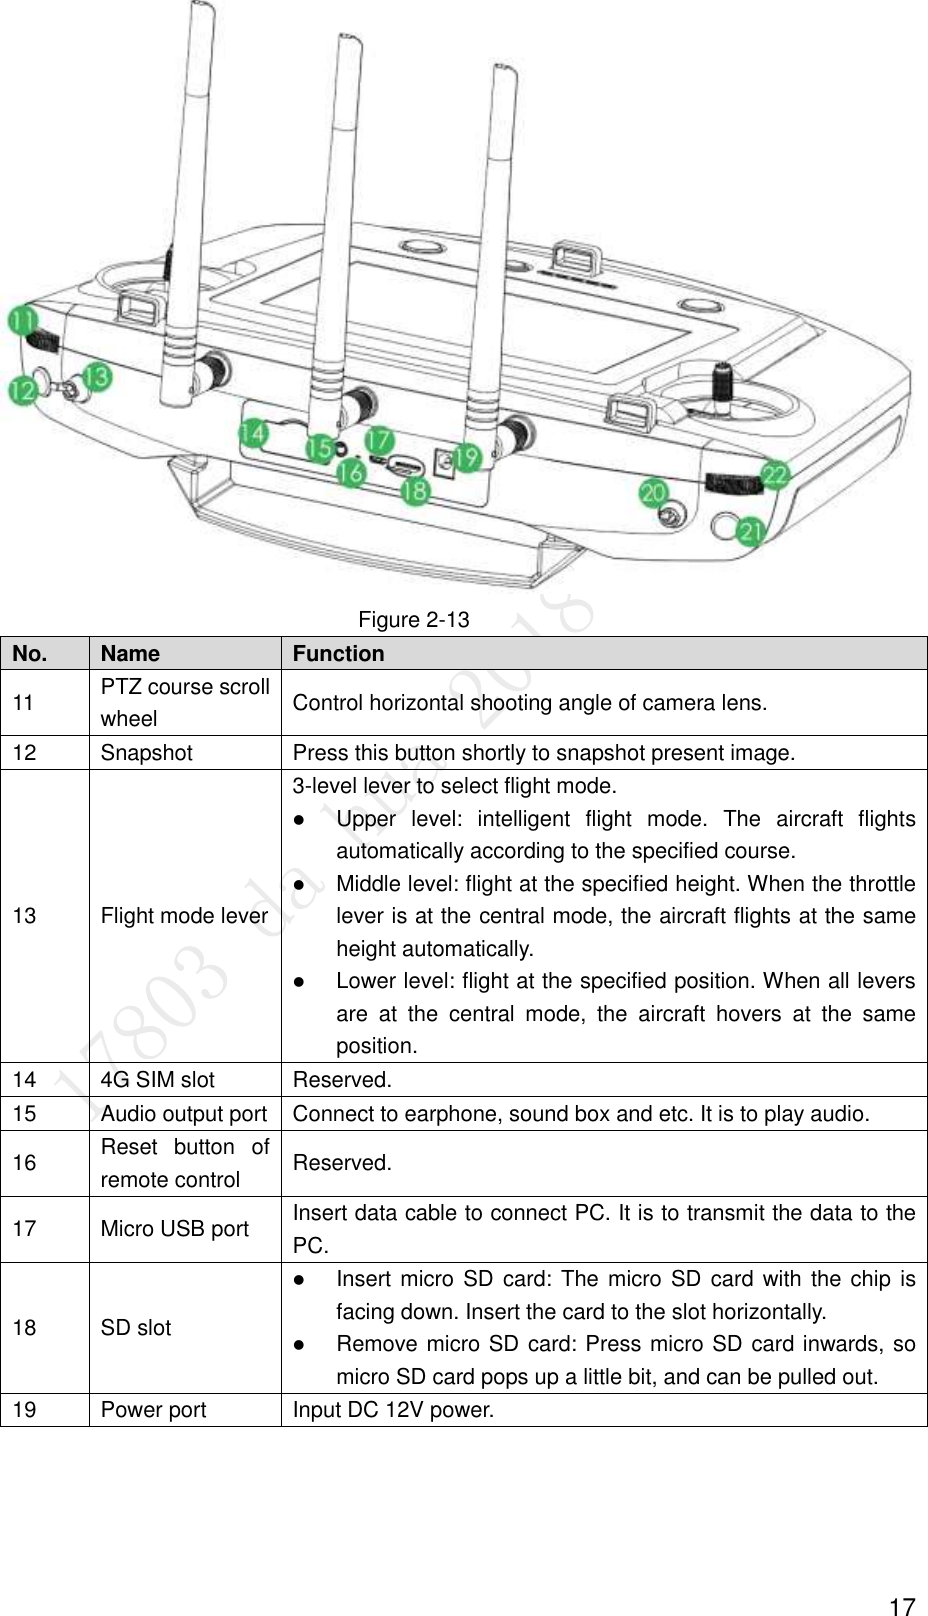  17  Figure 2-13 No. Name Function   11 PTZ course scroll wheel Control horizontal shooting angle of camera lens.   12 Snapshot   Press this button shortly to snapshot present image.   13 Flight mode lever 3-level lever to select flight mode.  Upper  level:  intelligent  flight  mode.  The  aircraft  flights automatically according to the specified course.    Middle level: flight at the specified height. When the throttle lever is at the central mode, the aircraft flights at the same height automatically.    Lower level: flight at the specified position. When all levers are  at  the  central  mode,  the  aircraft  hovers  at  the  same position.   14 4G SIM slot Reserved. 15 Audio output port Connect to earphone, sound box and etc. It is to play audio.   16 Reset  button  of remote control   Reserved.   17 Micro USB port Insert data cable to connect PC. It is to transmit the data to the PC. 18 SD slot  Insert micro SD  card: The micro SD card with the chip is facing down. Insert the card to the slot horizontally.    Remove micro SD card: Press micro SD card inwards, so micro SD card pops up a little bit, and can be pulled out. 19 Power port Input DC 12V power. 